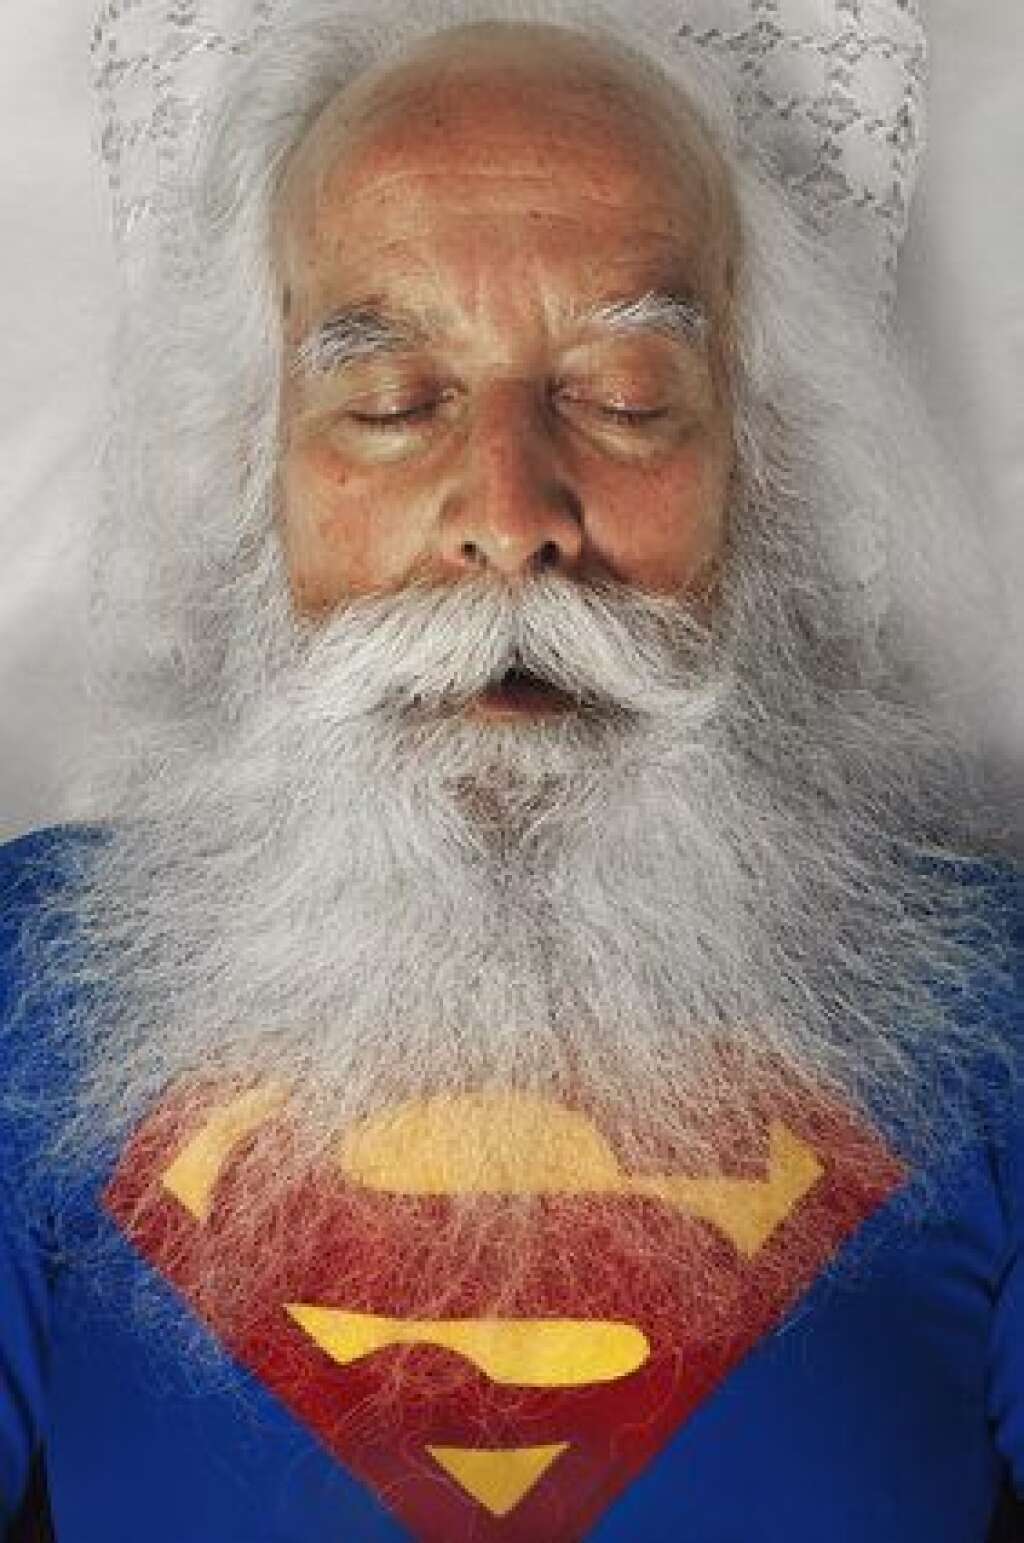 Superman - Romina Ressia série "Not about death"